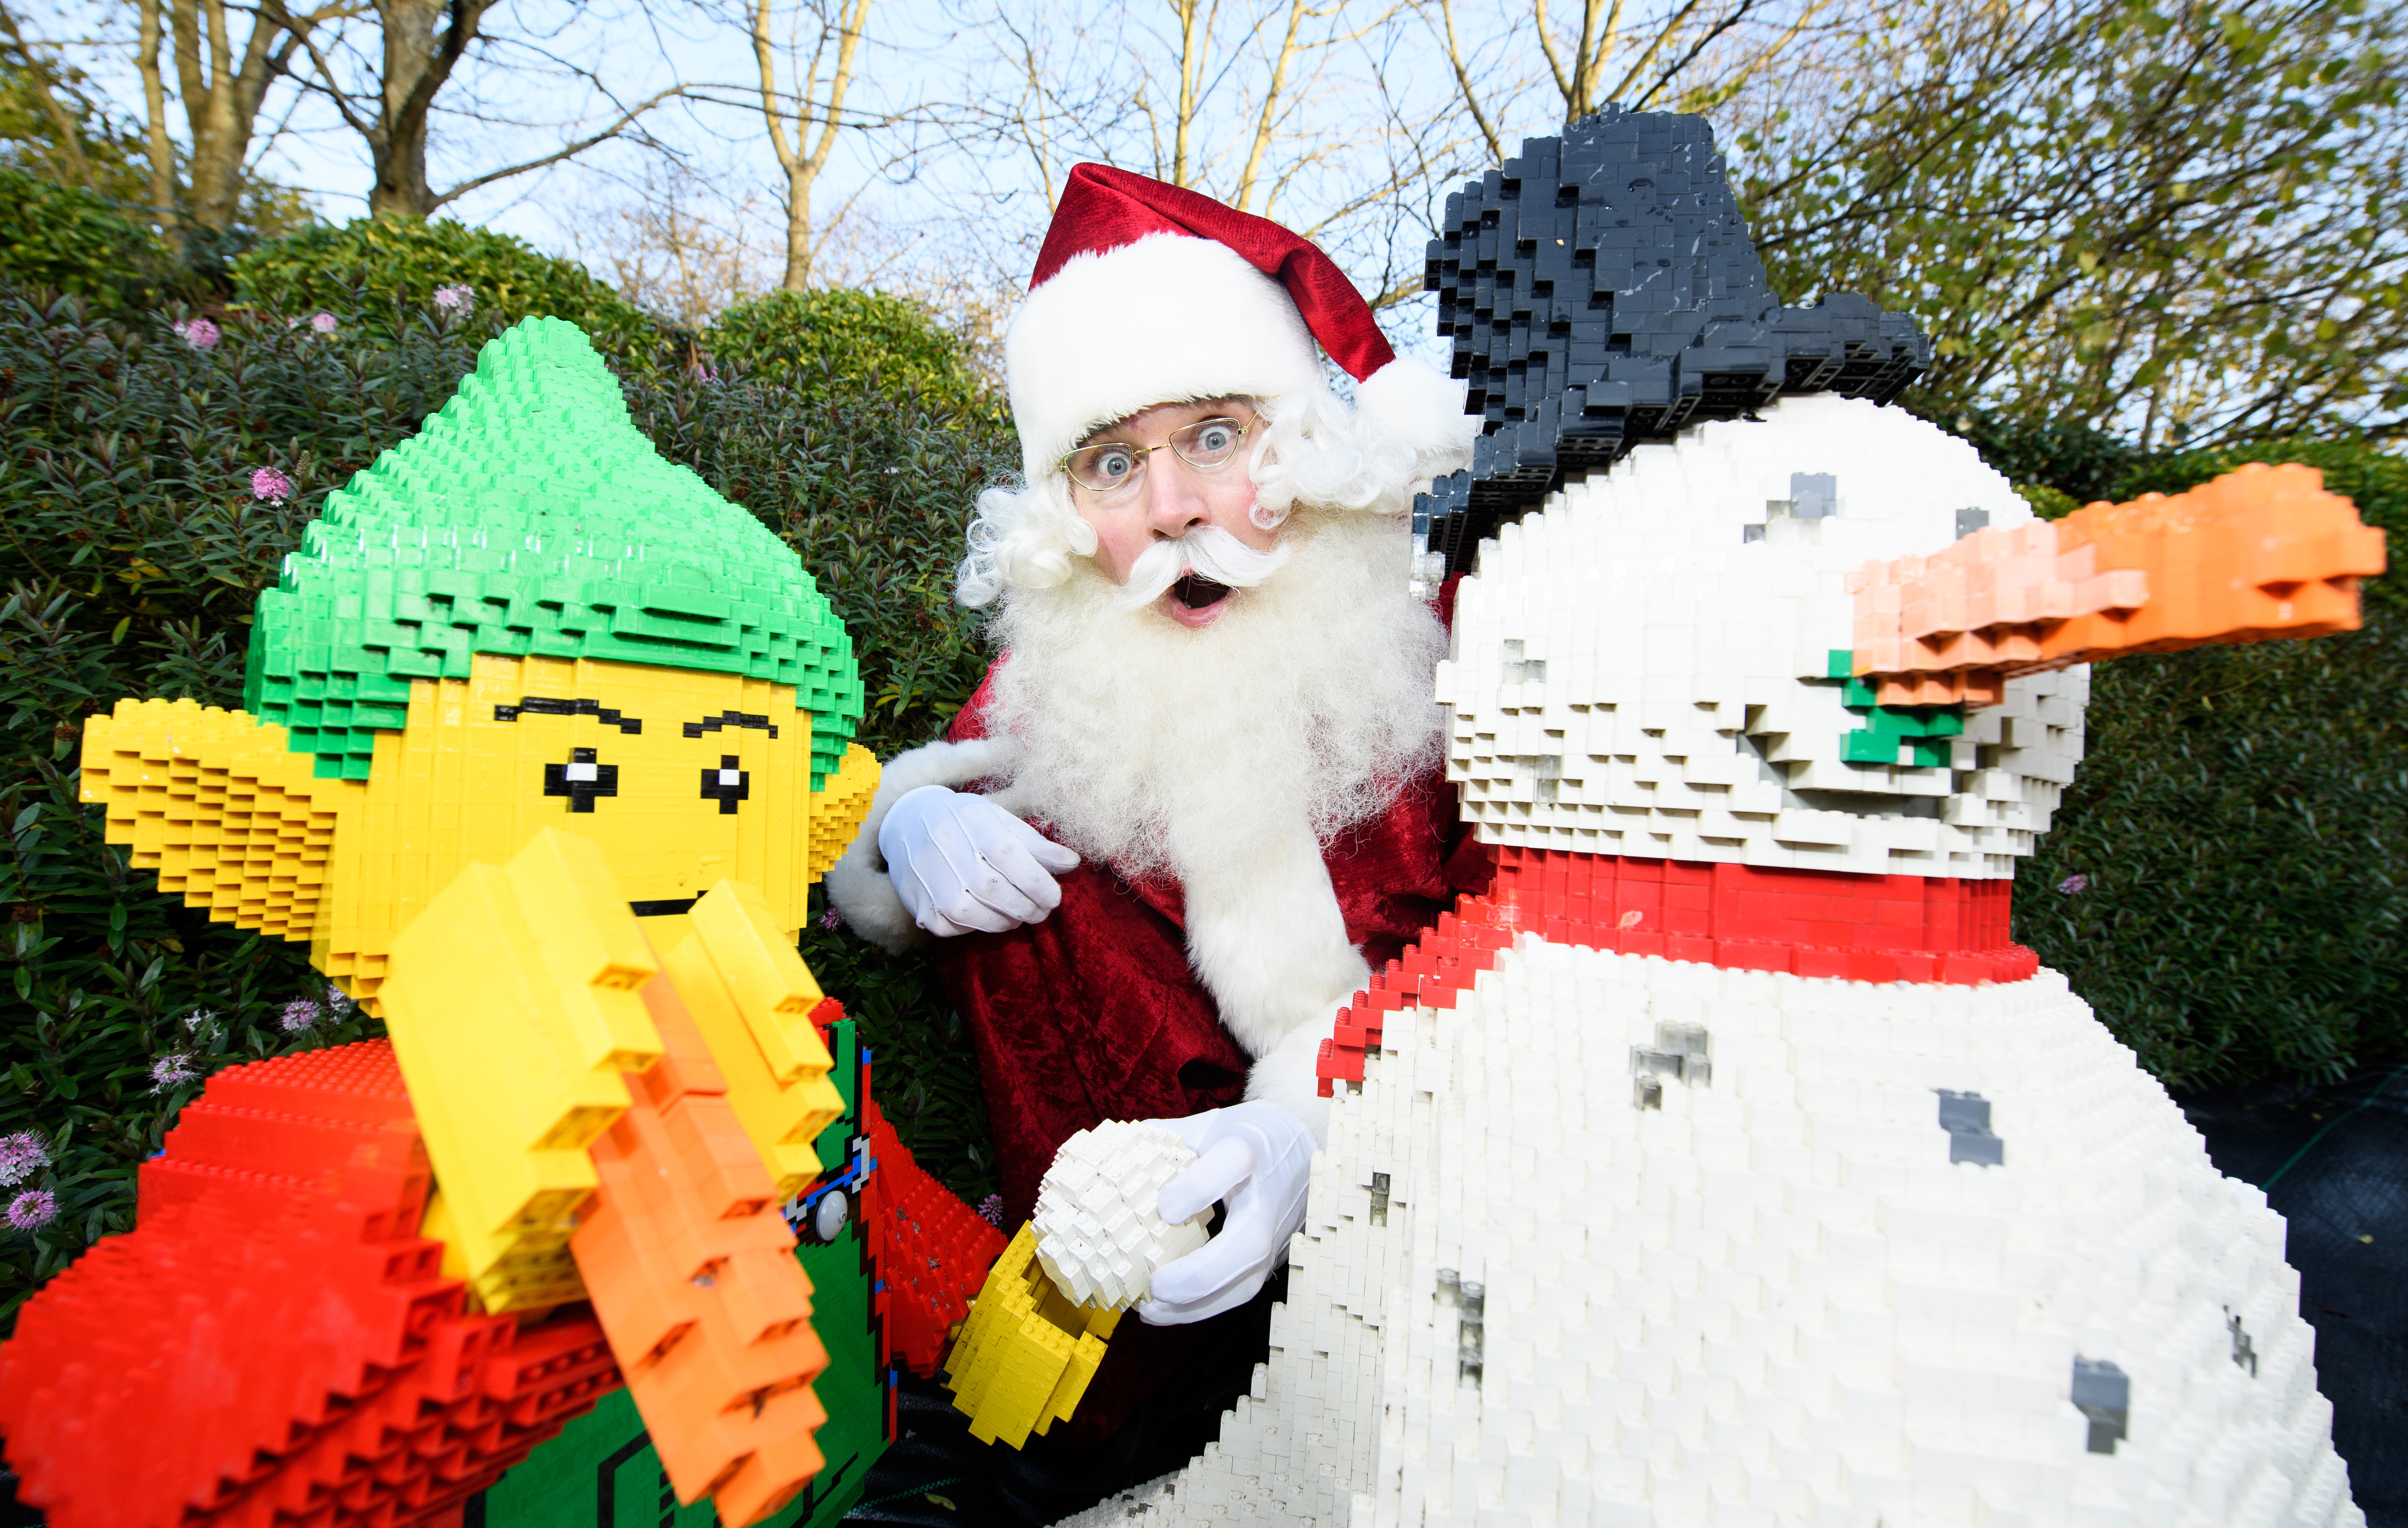 Father Christmas with LEGO models of Snowman and Elf at LEGOLAND at Christmas at the LEGOLAND Windsor Resort